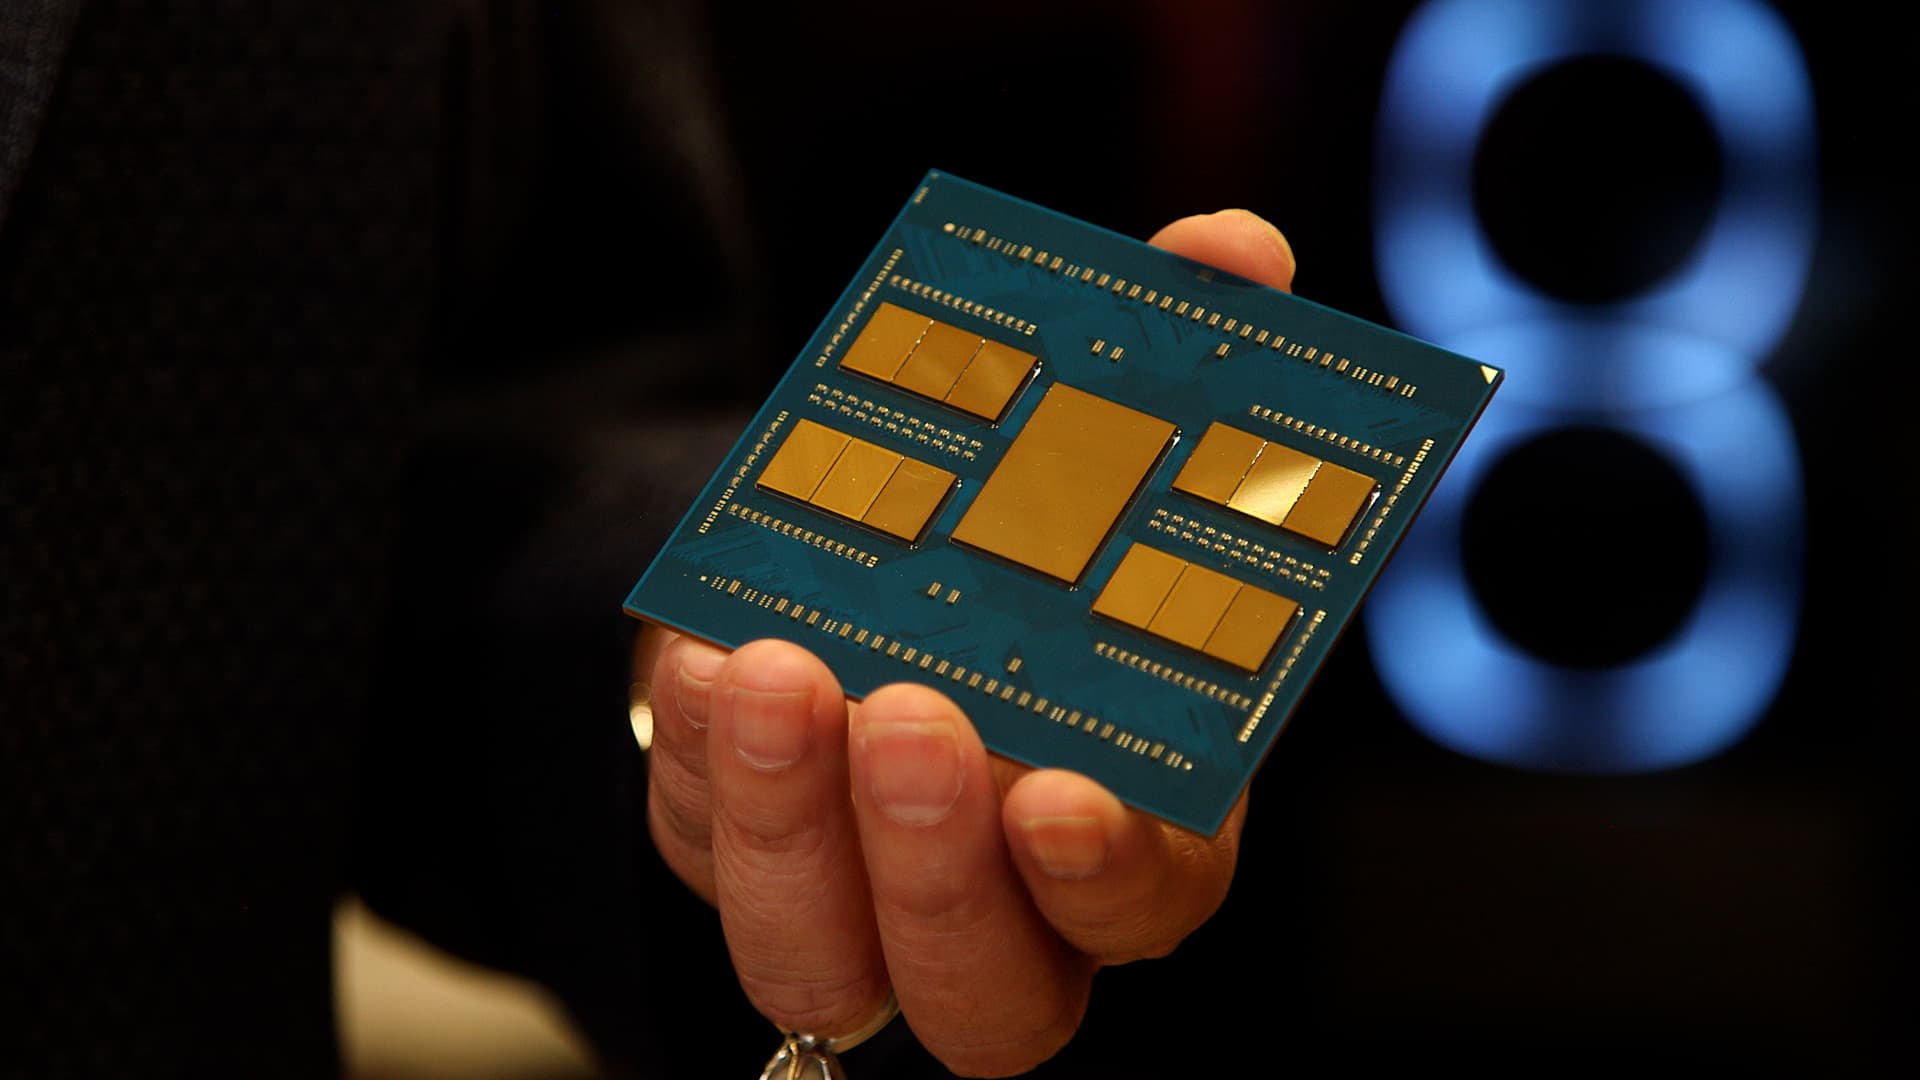 Intel's CPU branding was already confusing, and today's new CPUs made it  worse